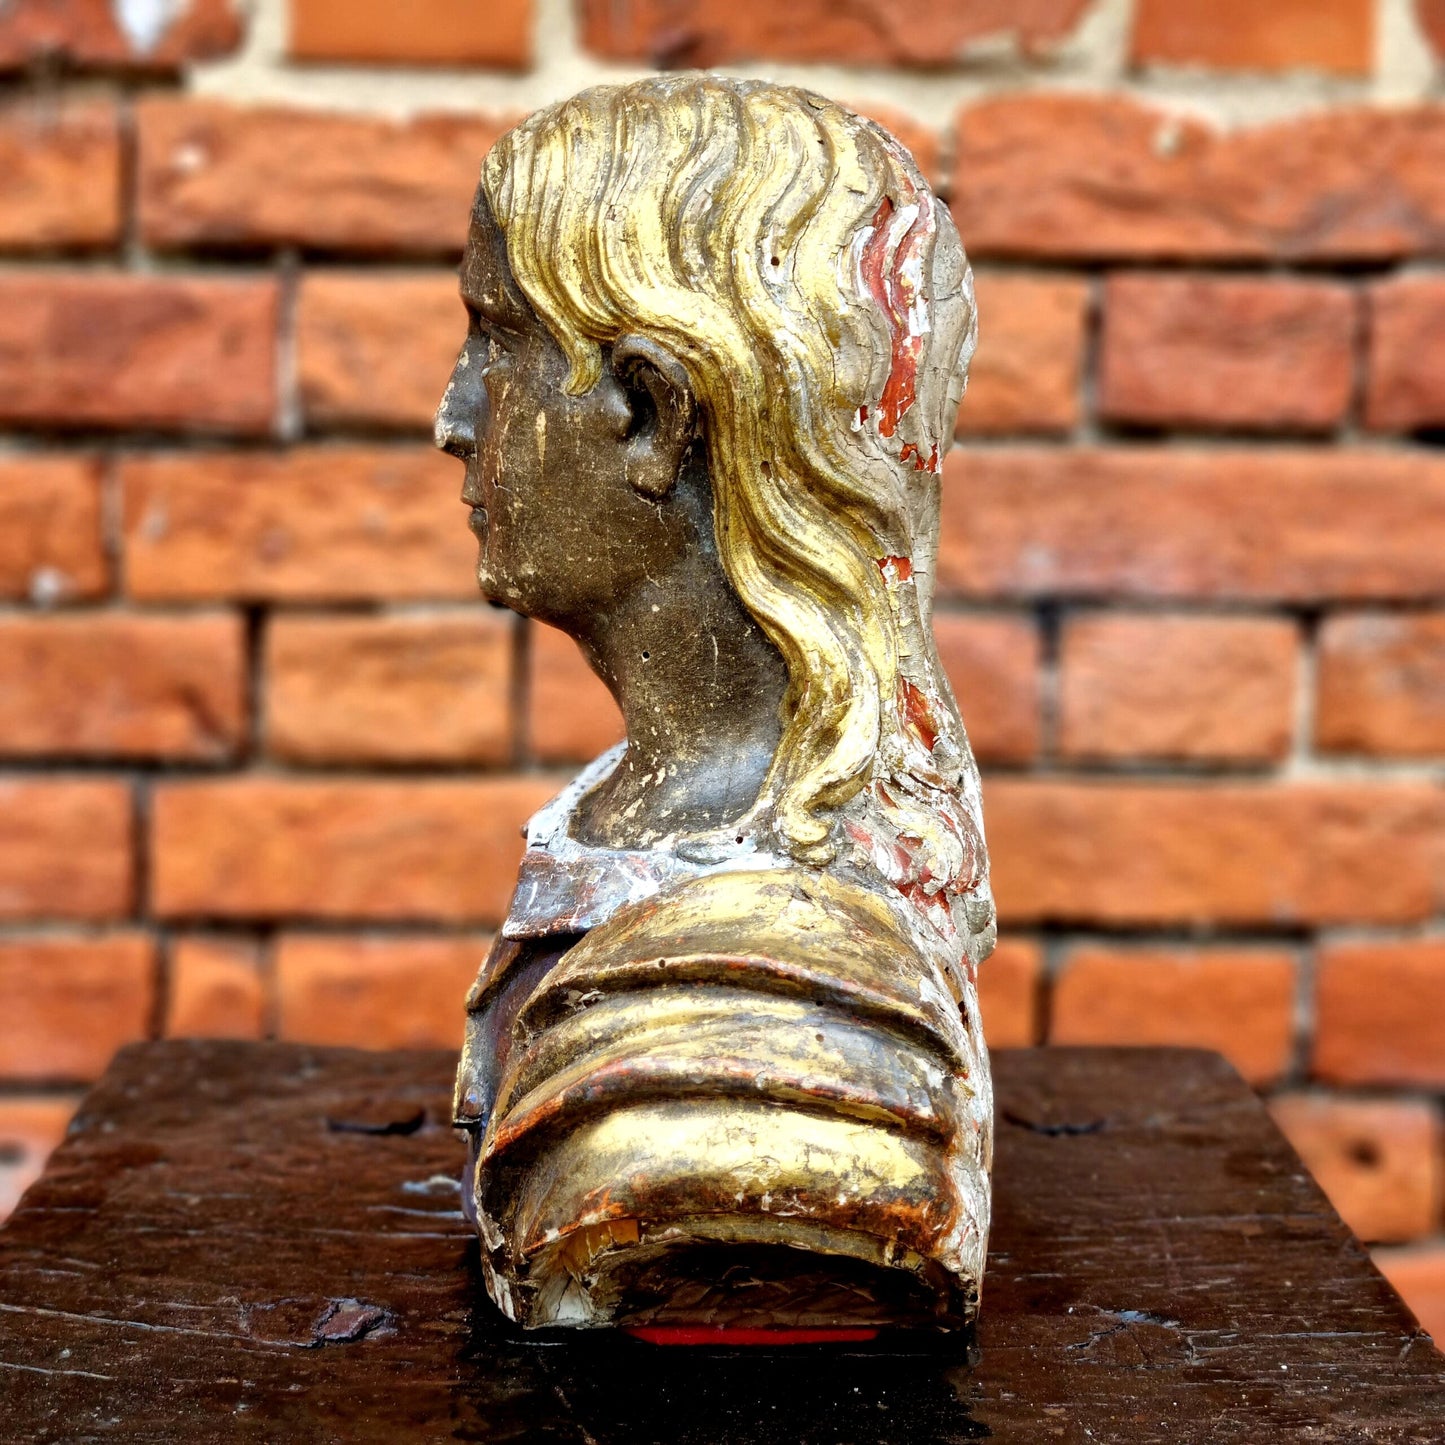 Large 17thC Italian Antique Baroque Period Carved Wood Reliquary Bust / Sculpture of a Saint